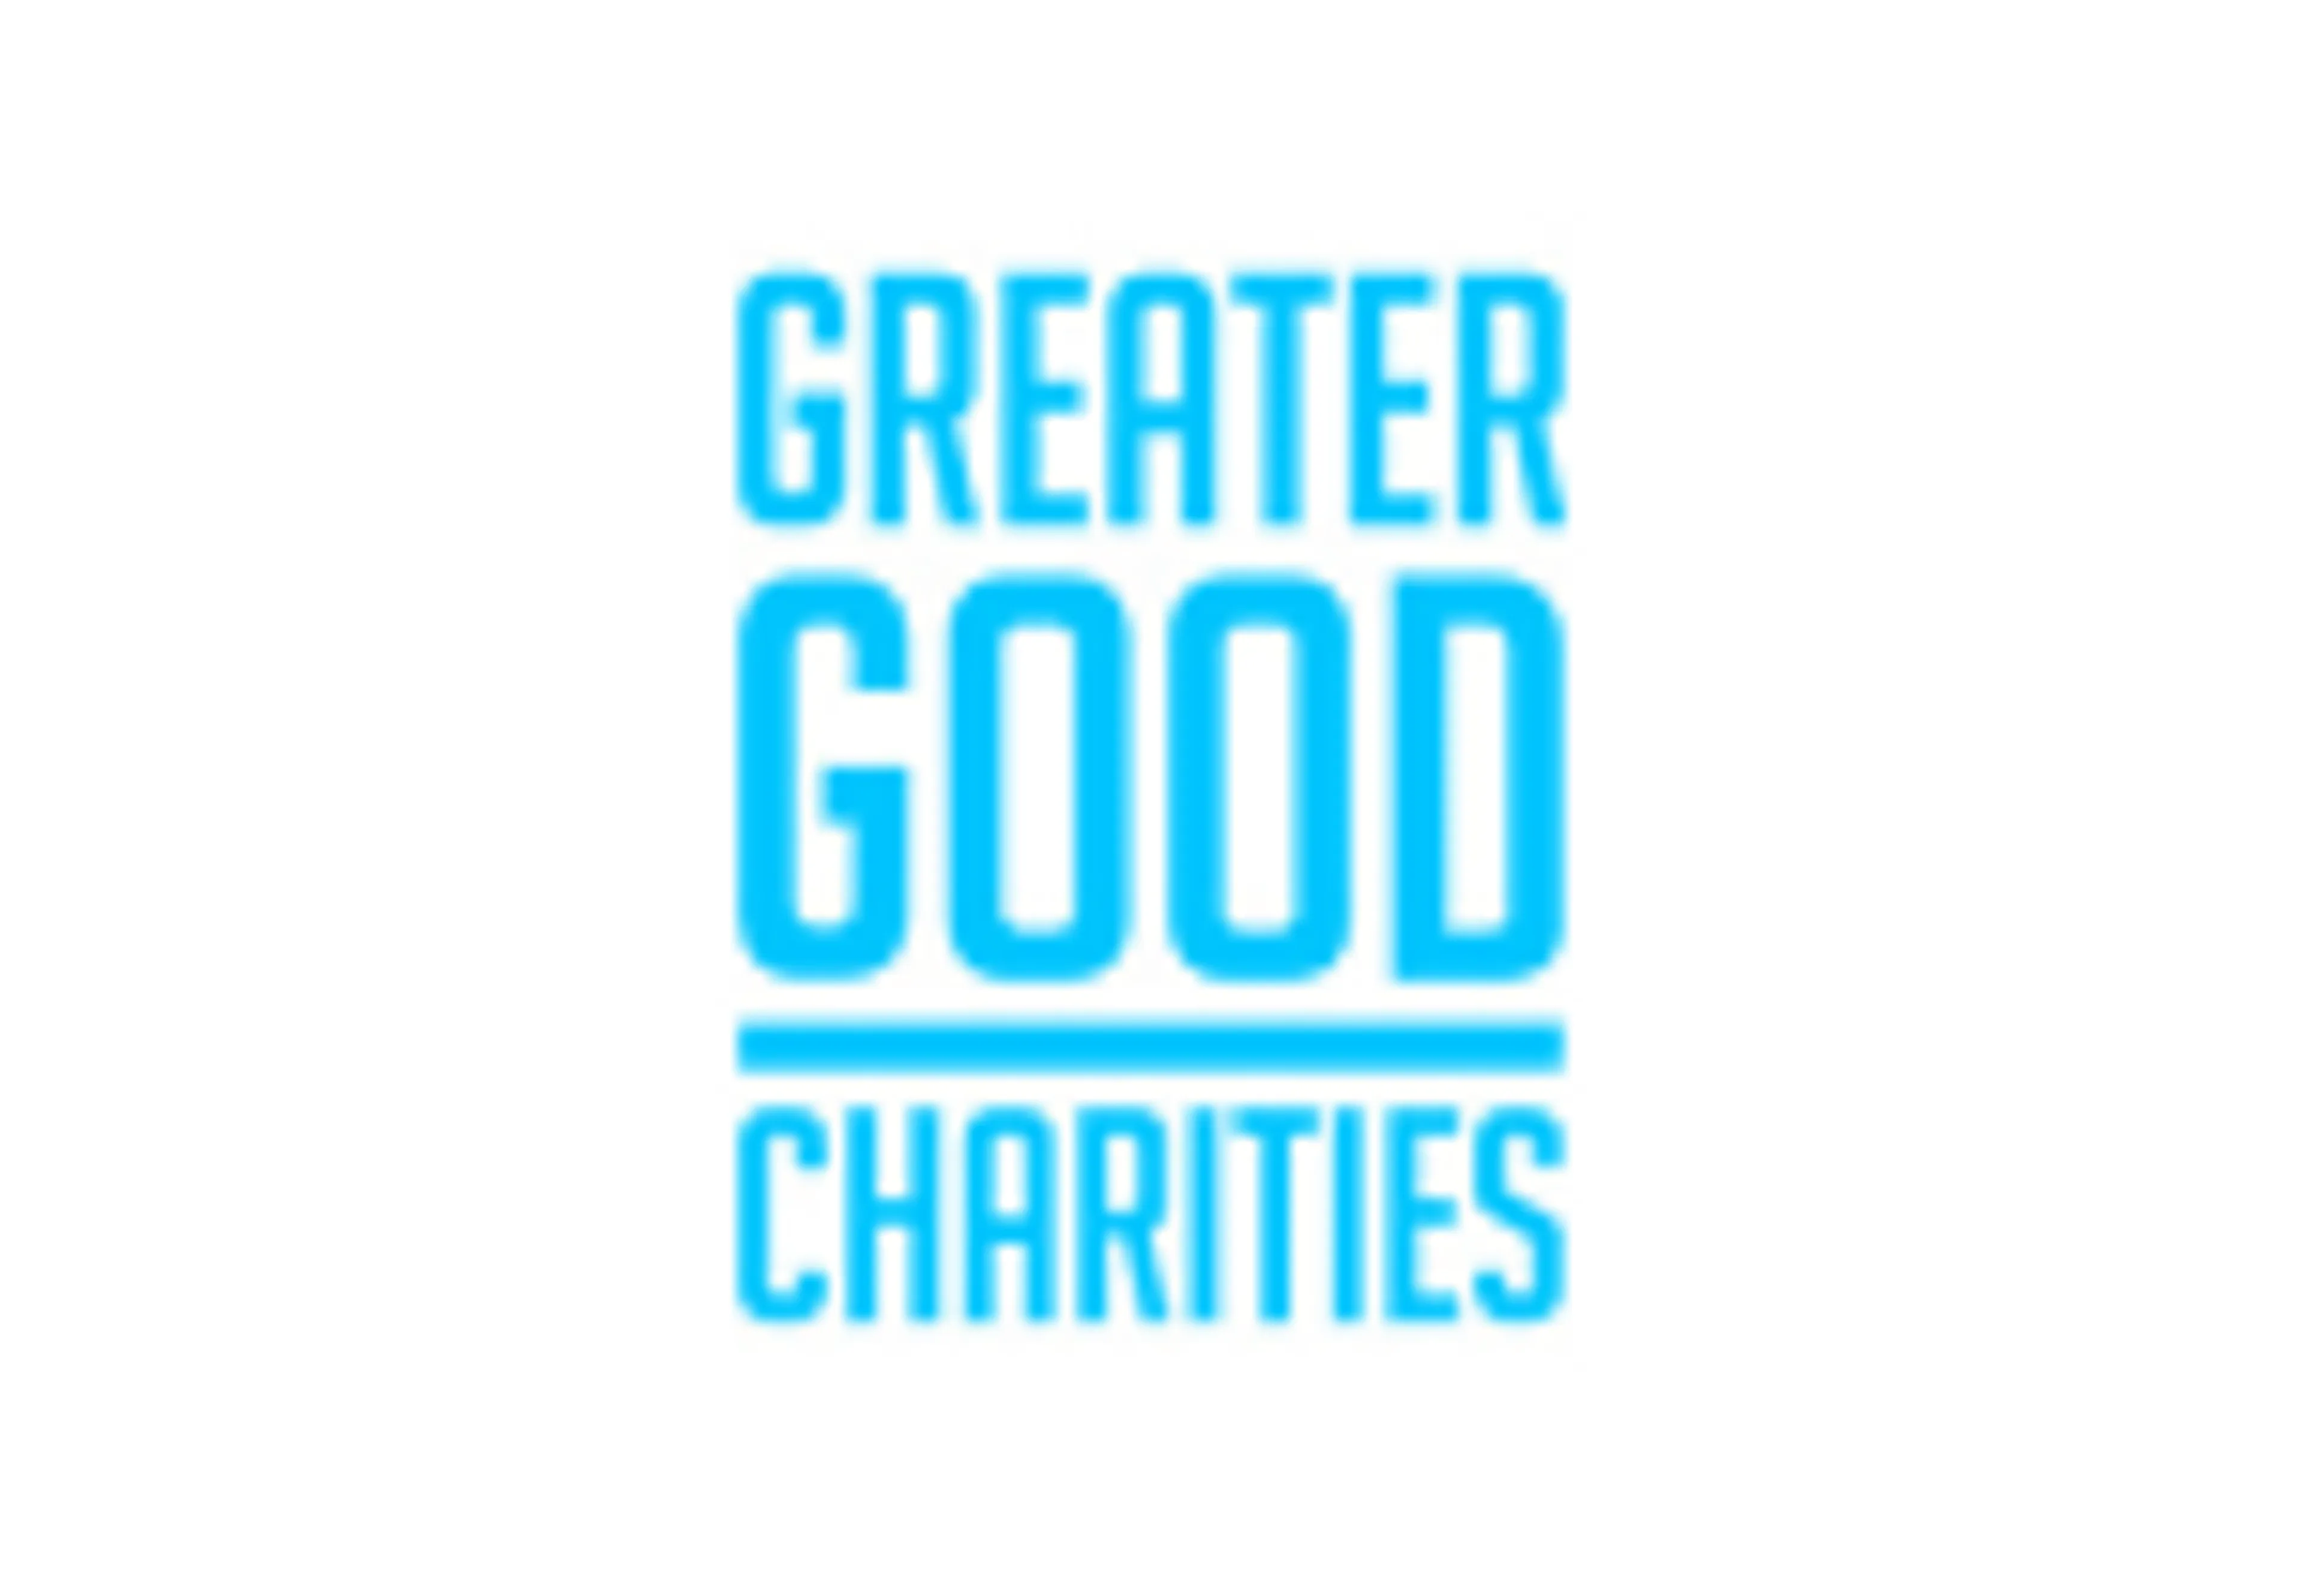 Greater Good